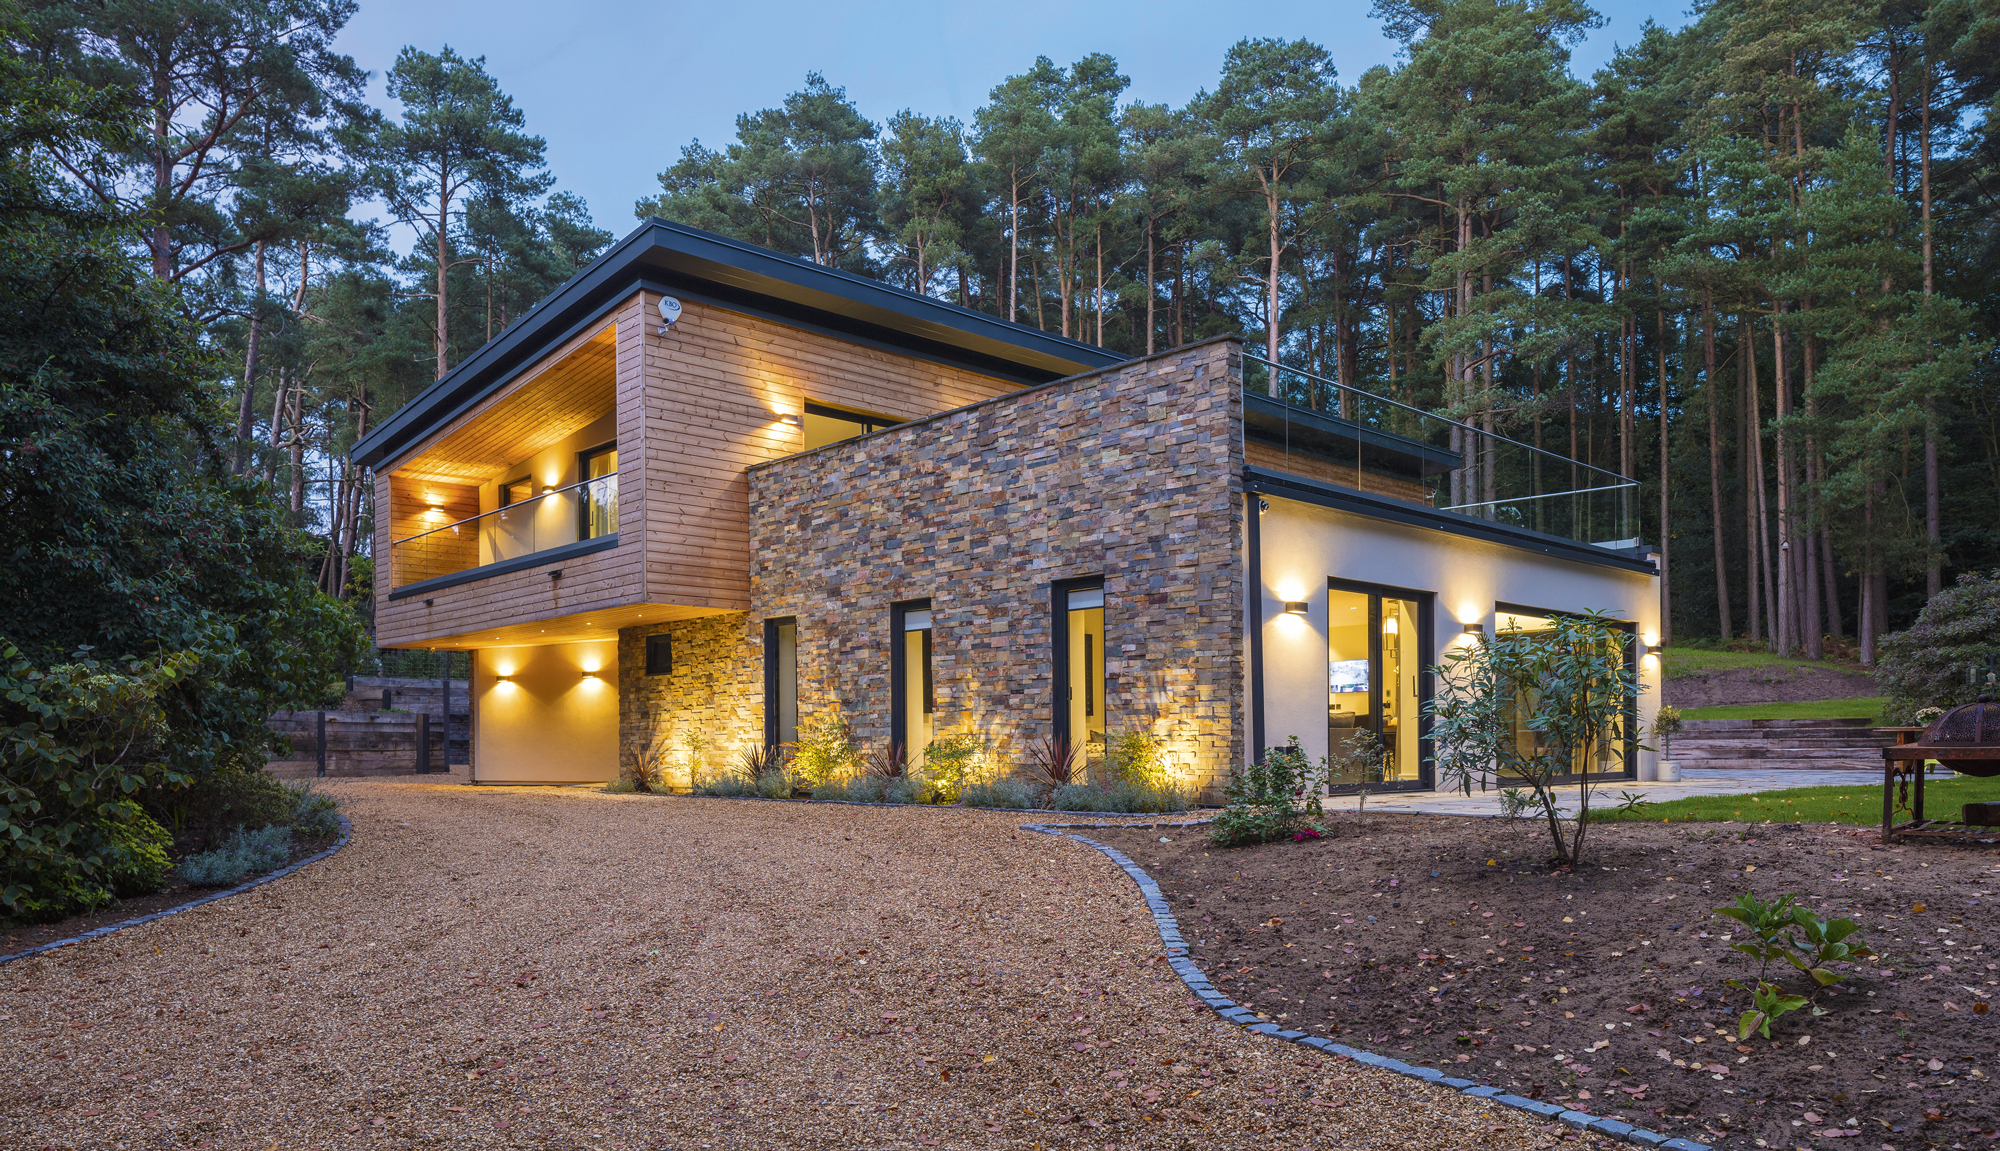 Fully integrated smart home as seen from outside clad in stone and timber